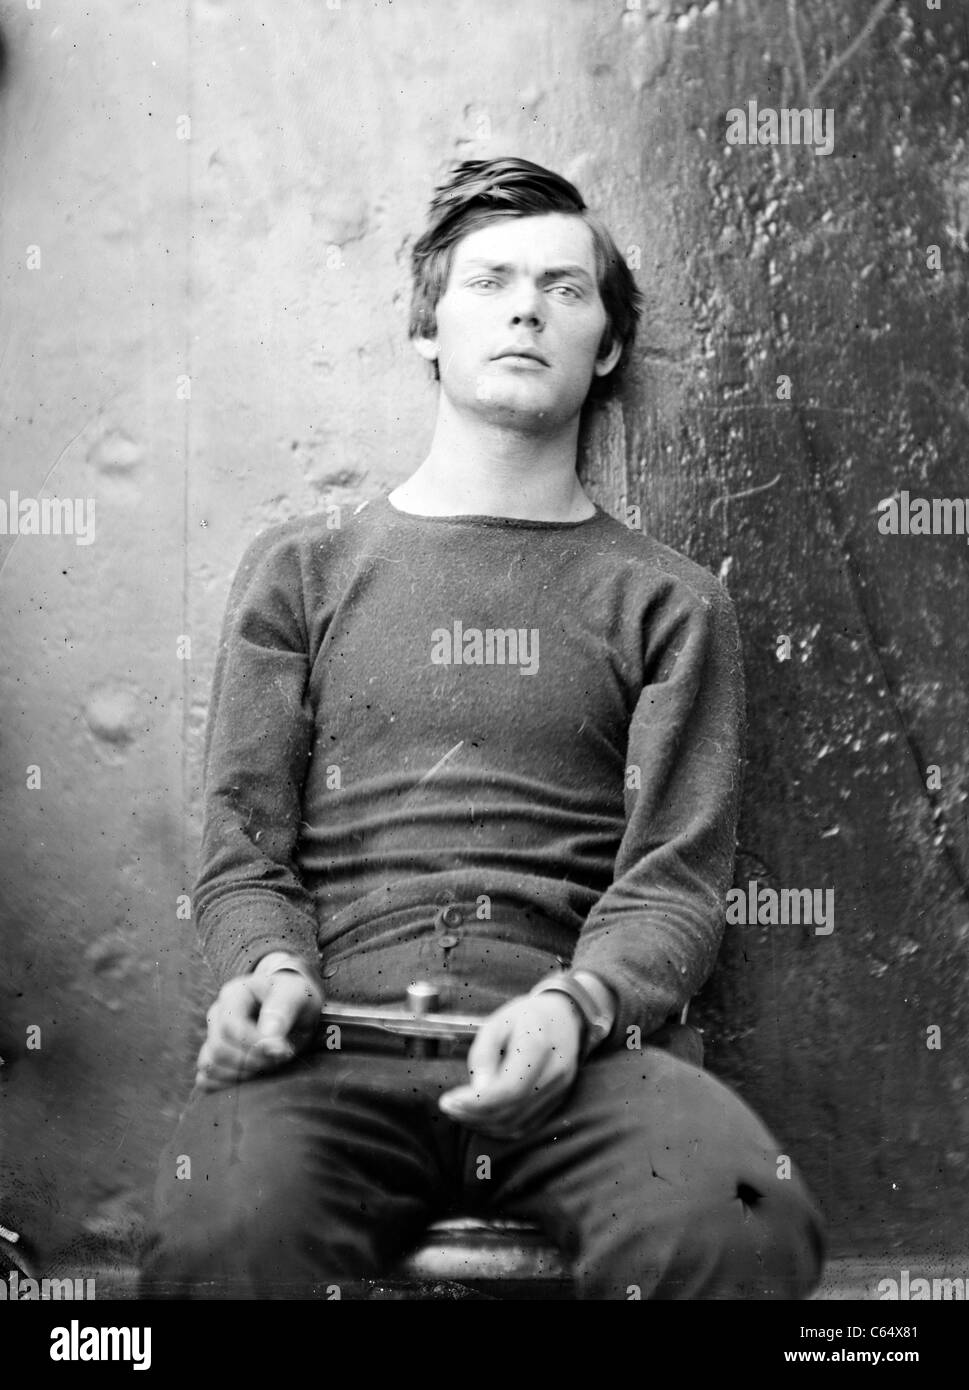 Lewis Thornton Powell, Lewis Paine, Lewis Payne, one of the conspirators in the assassination of President Lincoln. Stock Photo